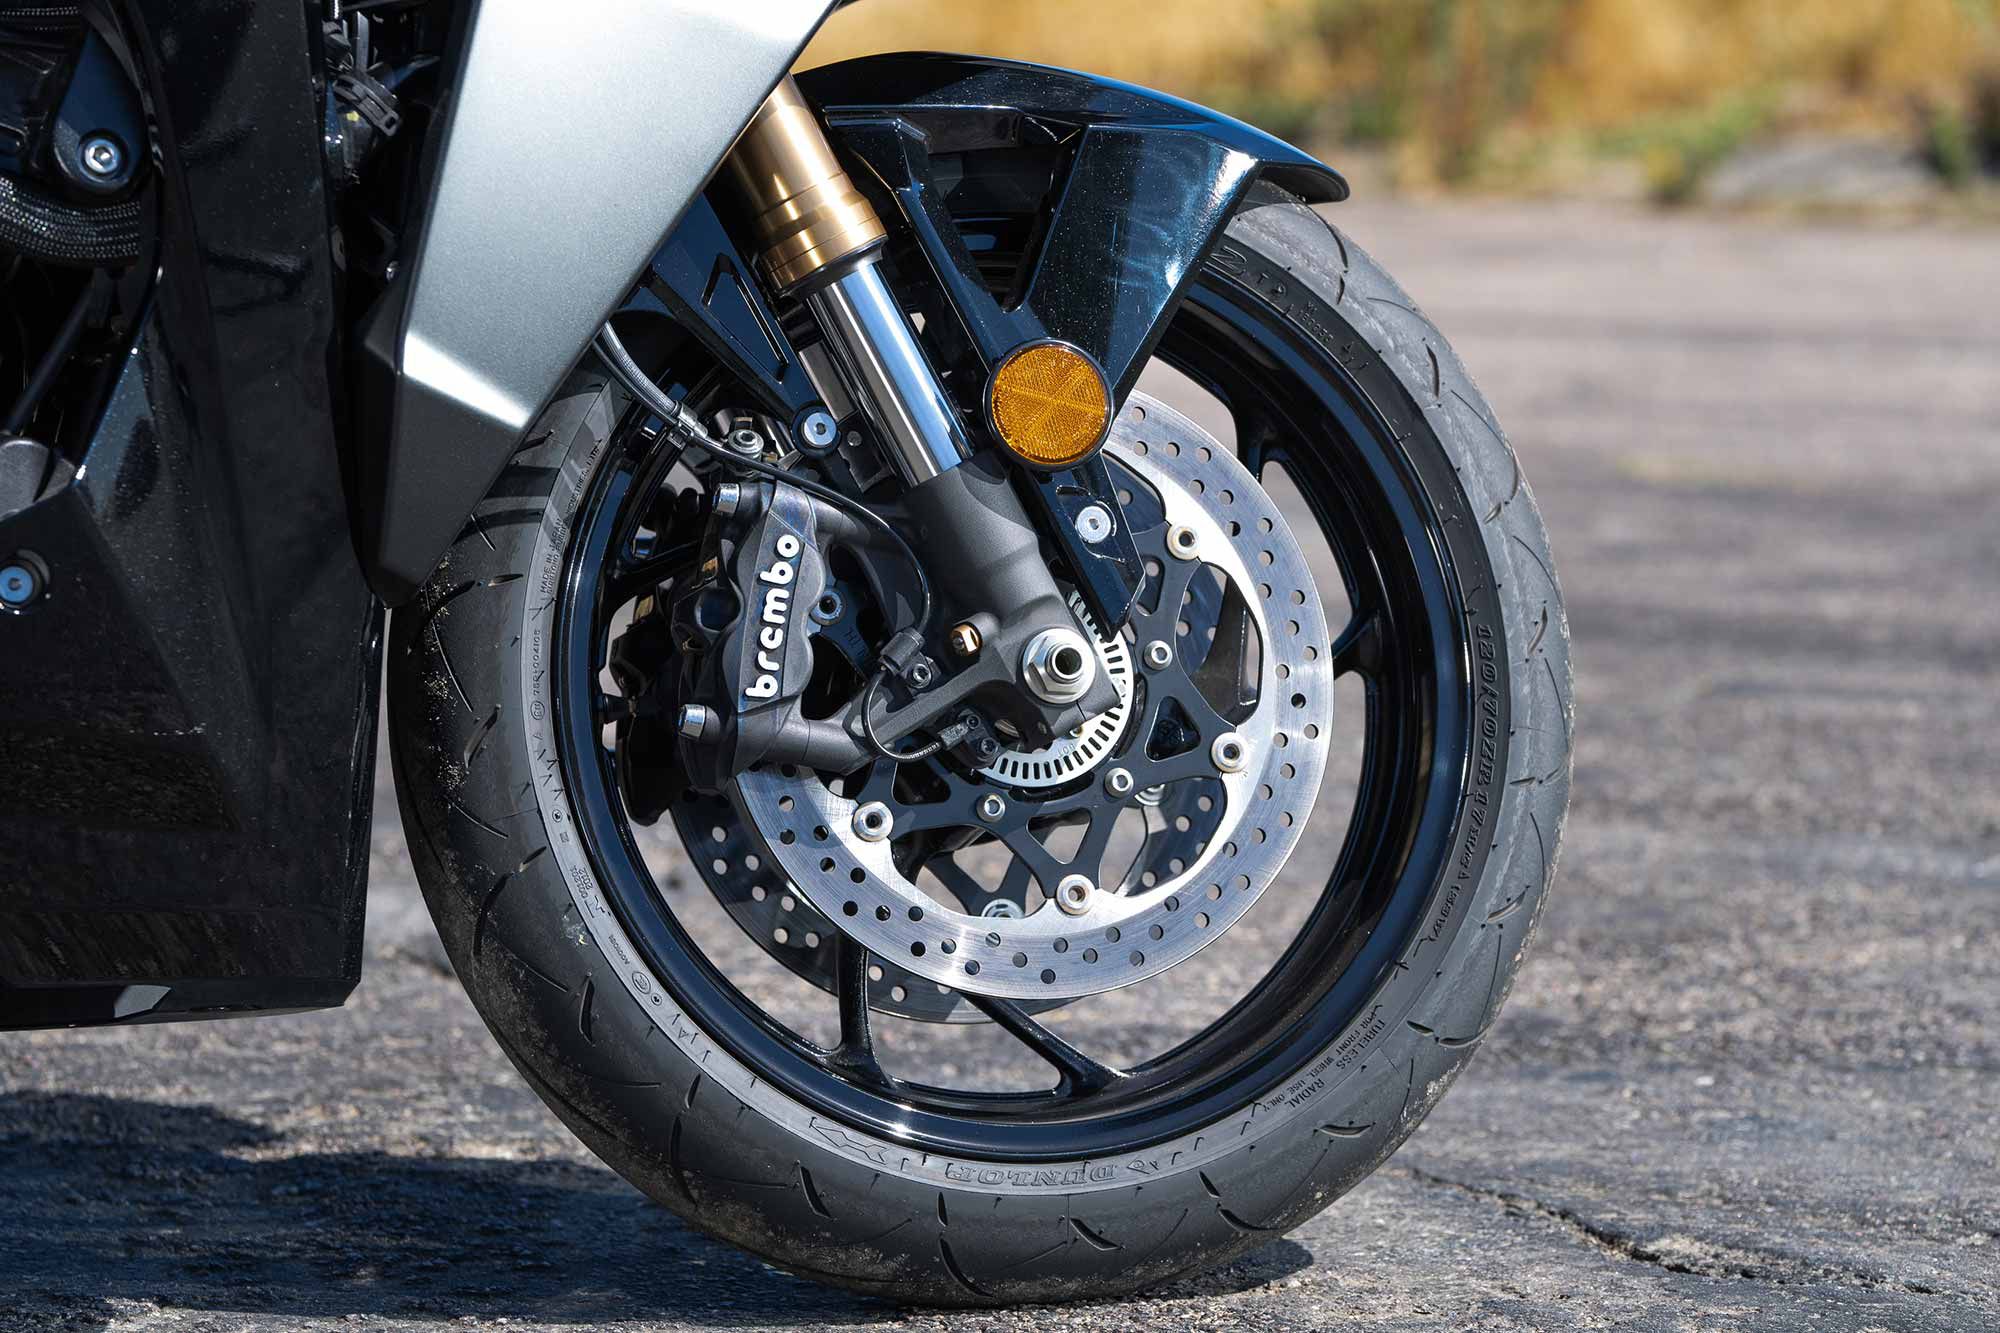 Fully adjustable front suspension and basic, but capable braking package help Suzuki riders carve through turns.